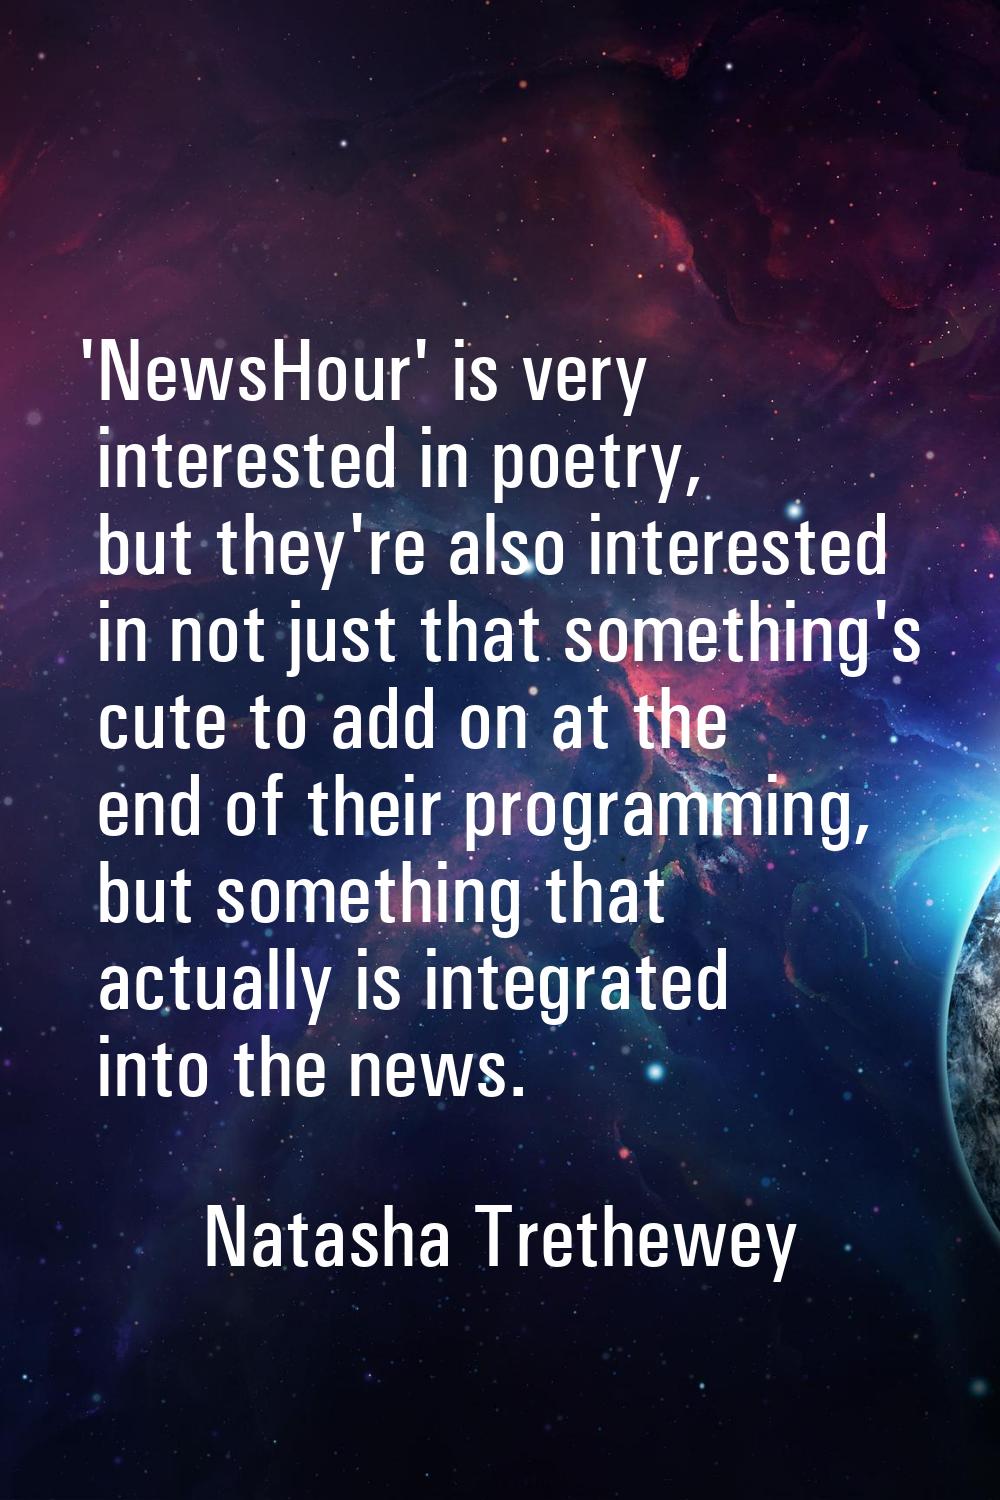 'NewsHour' is very interested in poetry, but they're also interested in not just that something's c